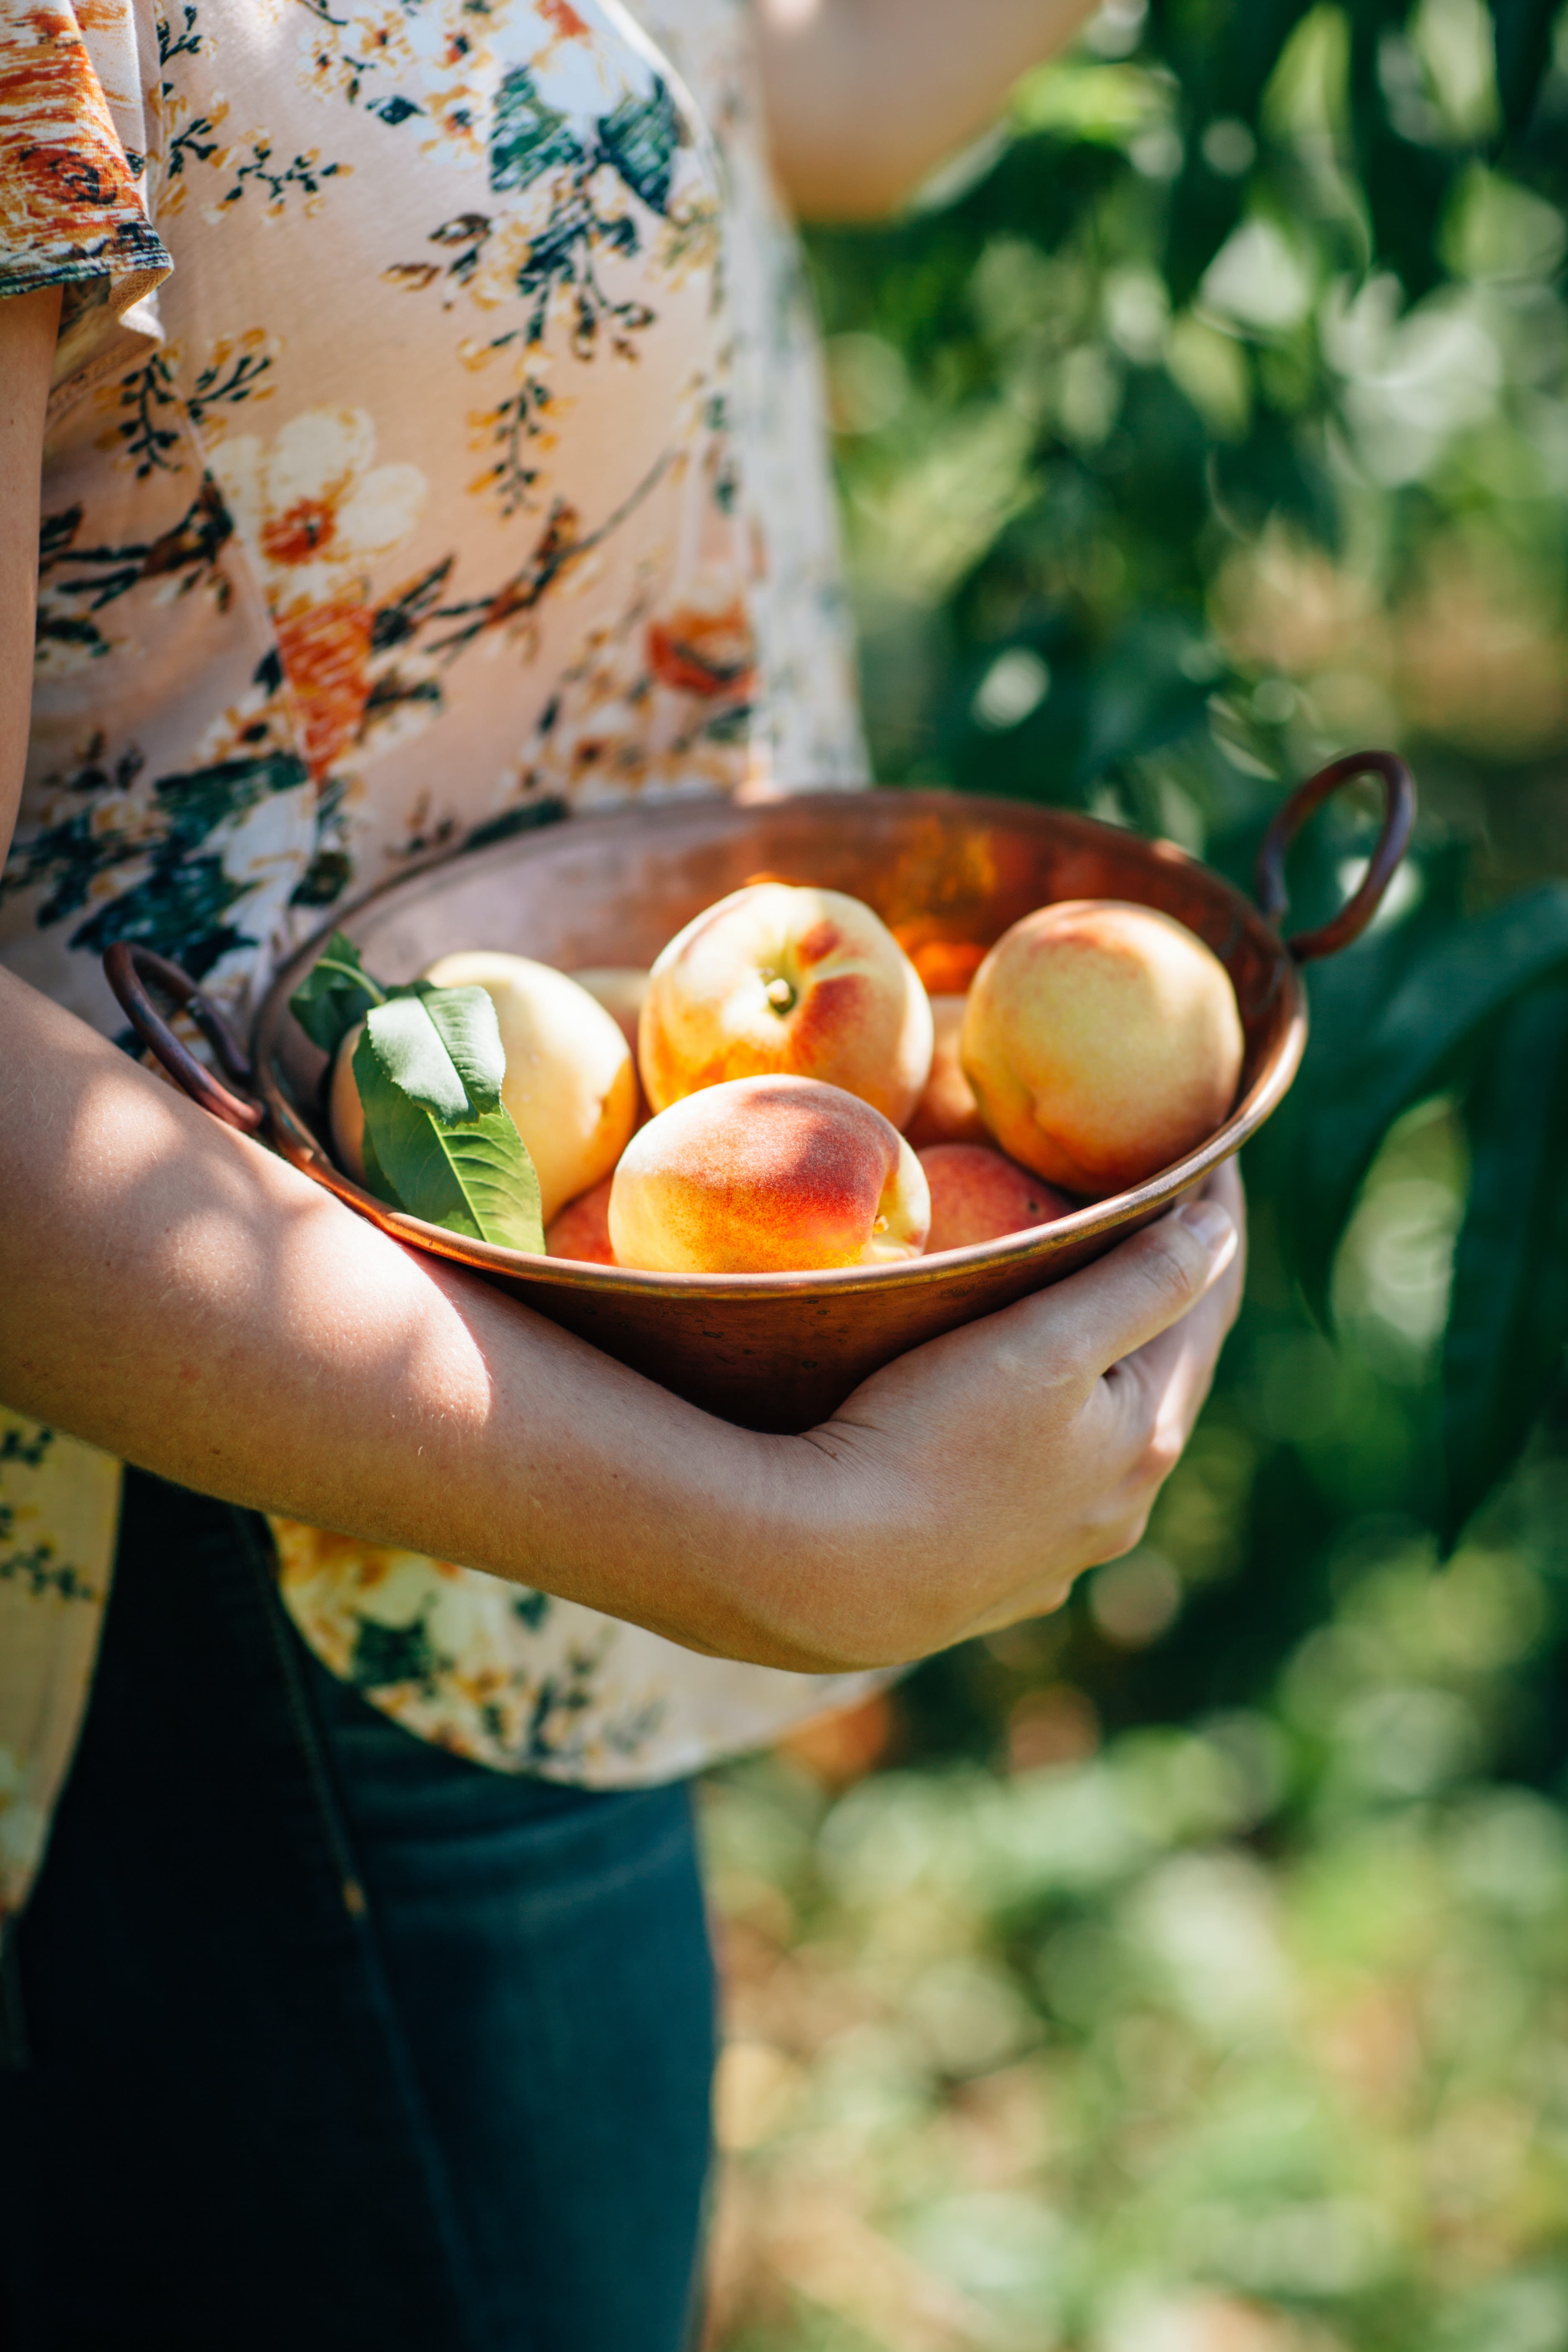 A person holding a bowl of peaches outside.